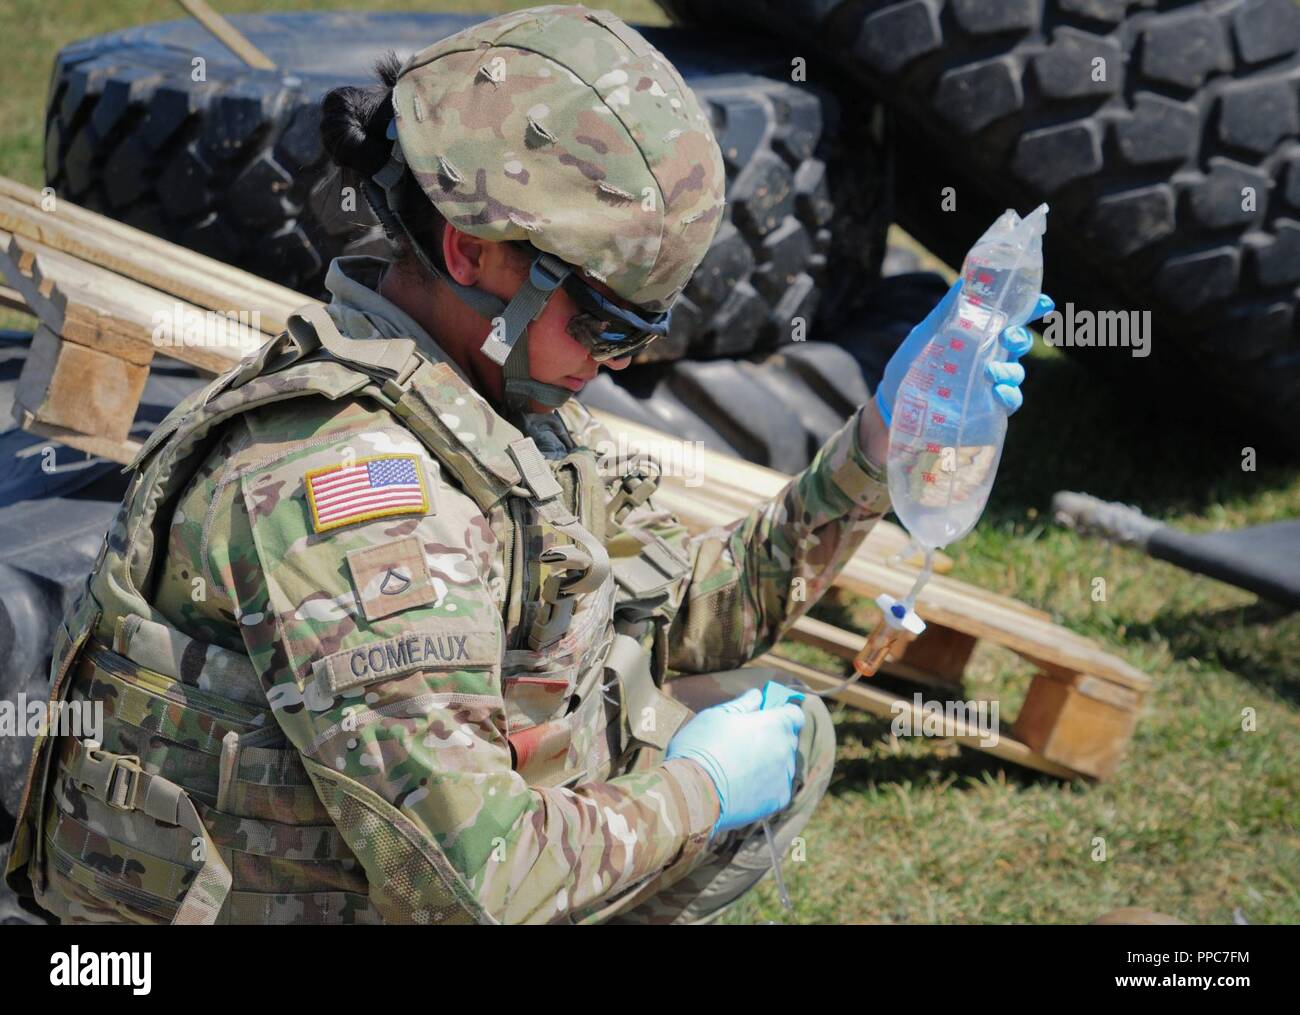 U.S. Army Pfc. Jasmine Comeaux a combat medic assigned to The Headquarters and Headquarters Company, 2nd Battalion 5th Cavalry Regiment, 1st Armored Brigade Combat Team, 1st Cavalry Division administers aid to a simulated casualty at Mihail Kogalniceanu Air Base in Romania, August 20, 2018. Soldiers conducted Table VIII Medic Skills Validation, an annual training event required for Soldiers to keep their Military Occupational Specialty qualification as a combat medic. Stock Photo